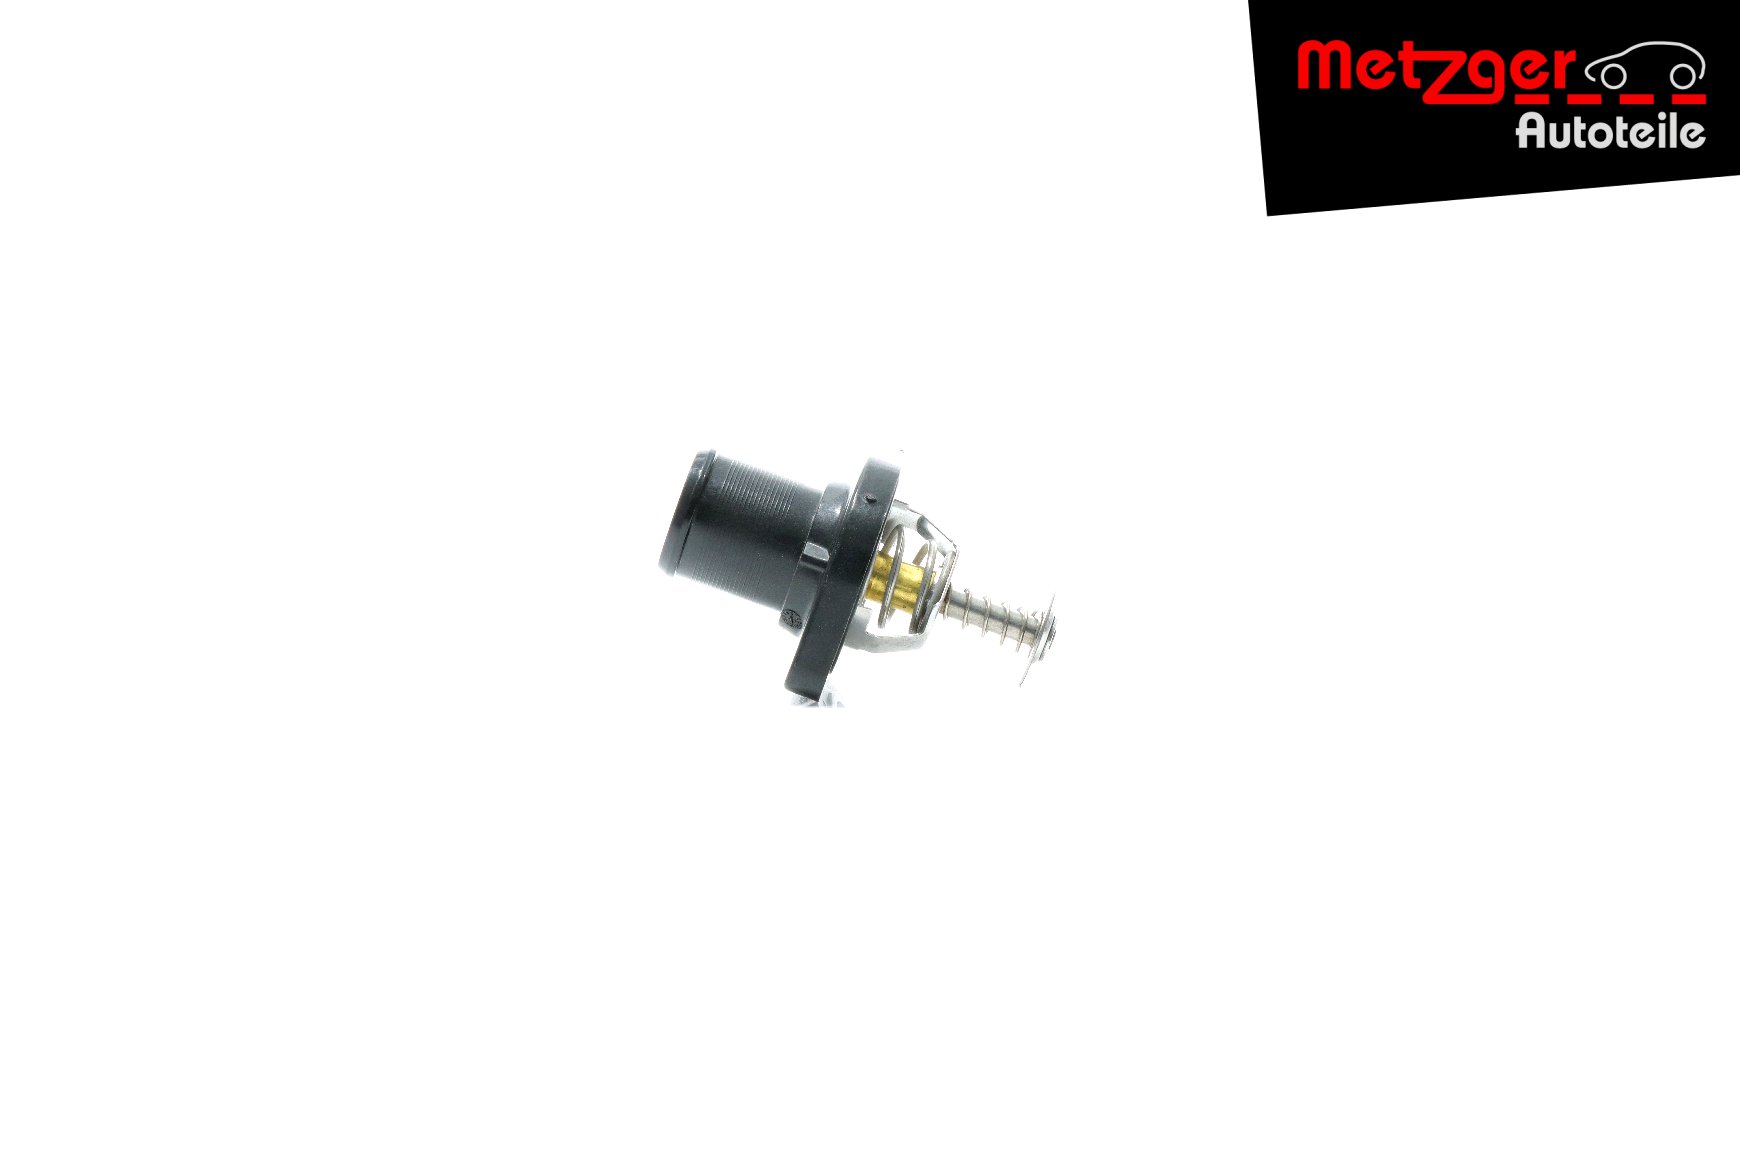 Citroën C8 Engine thermostat METZGER 4006090 cheap